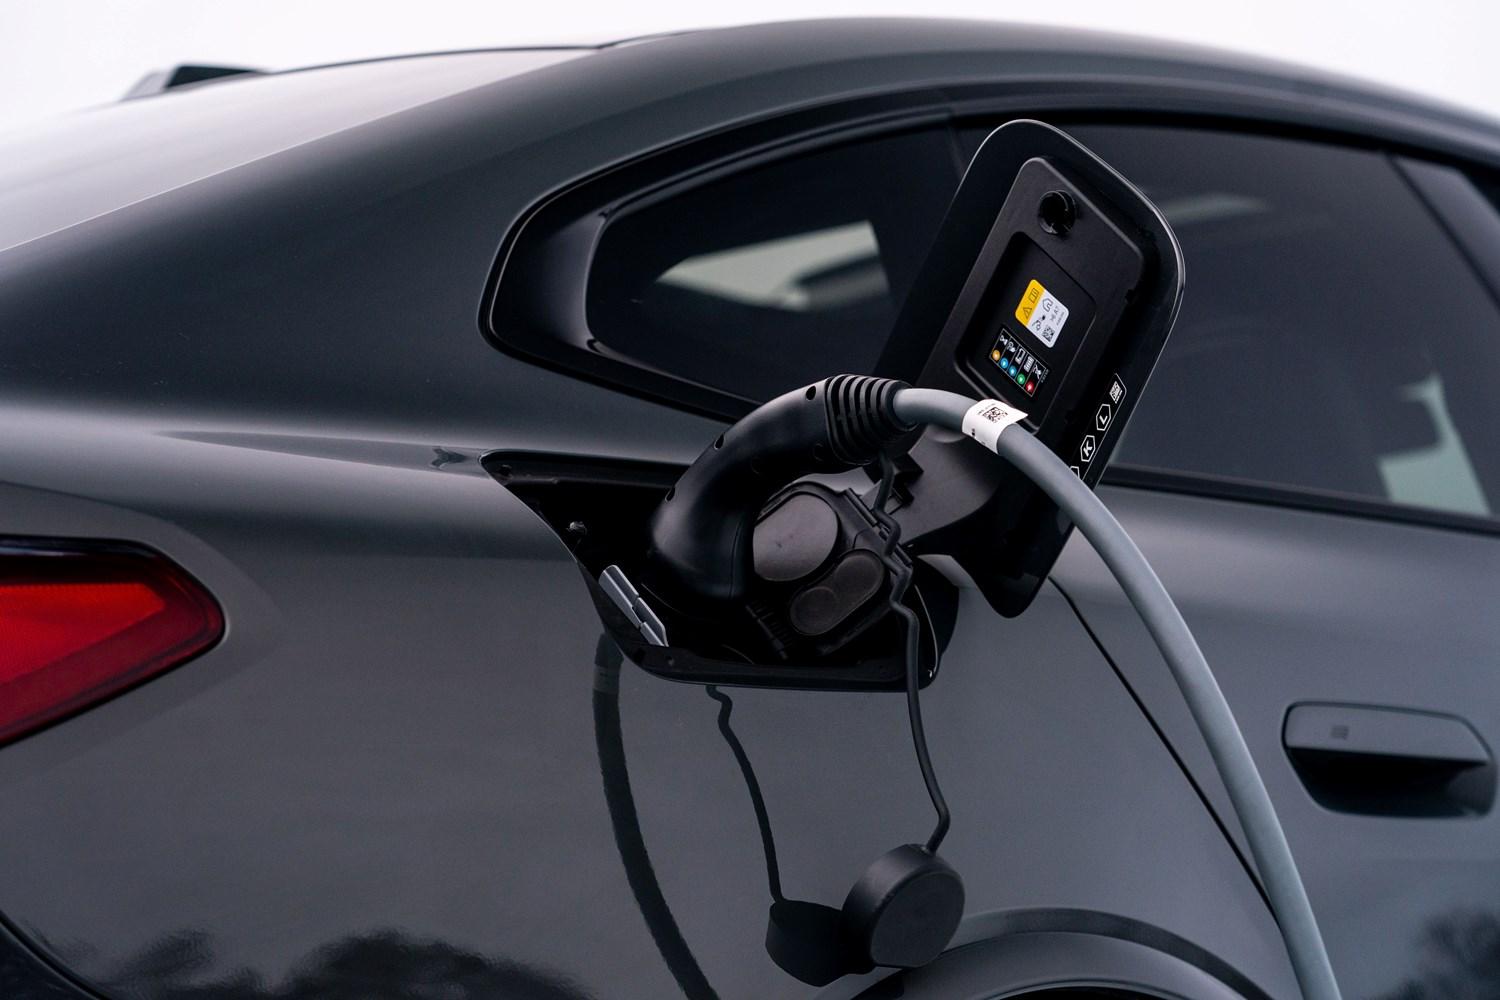 Close-up of the charging port of the BMW 1-Series with charger plugged in